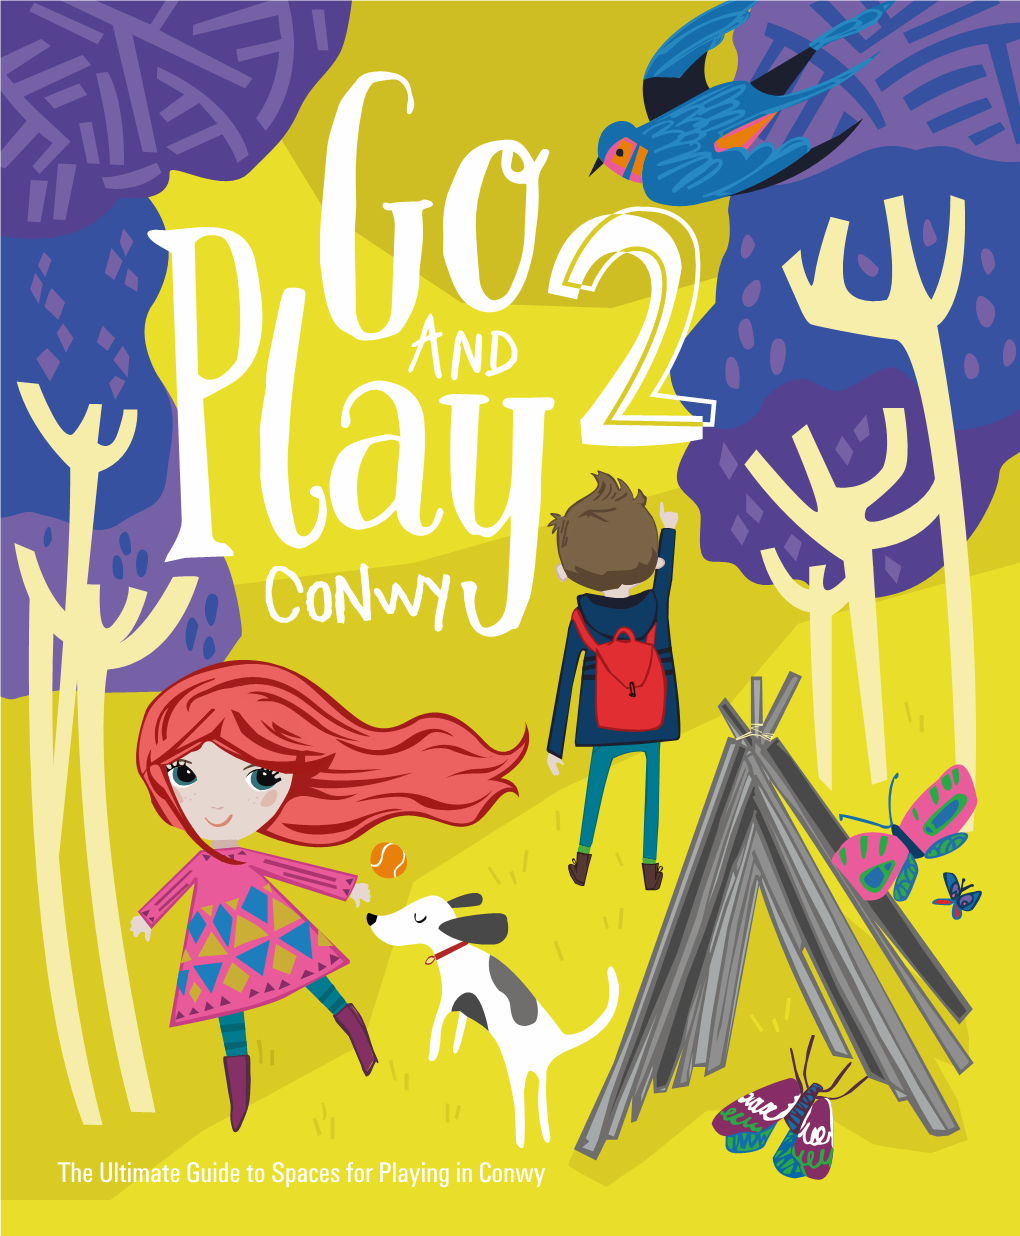 The Ultimate Guide to Spaces for Playing in Conwy This Guide Has Been Produced by the Conwy Play Development Team